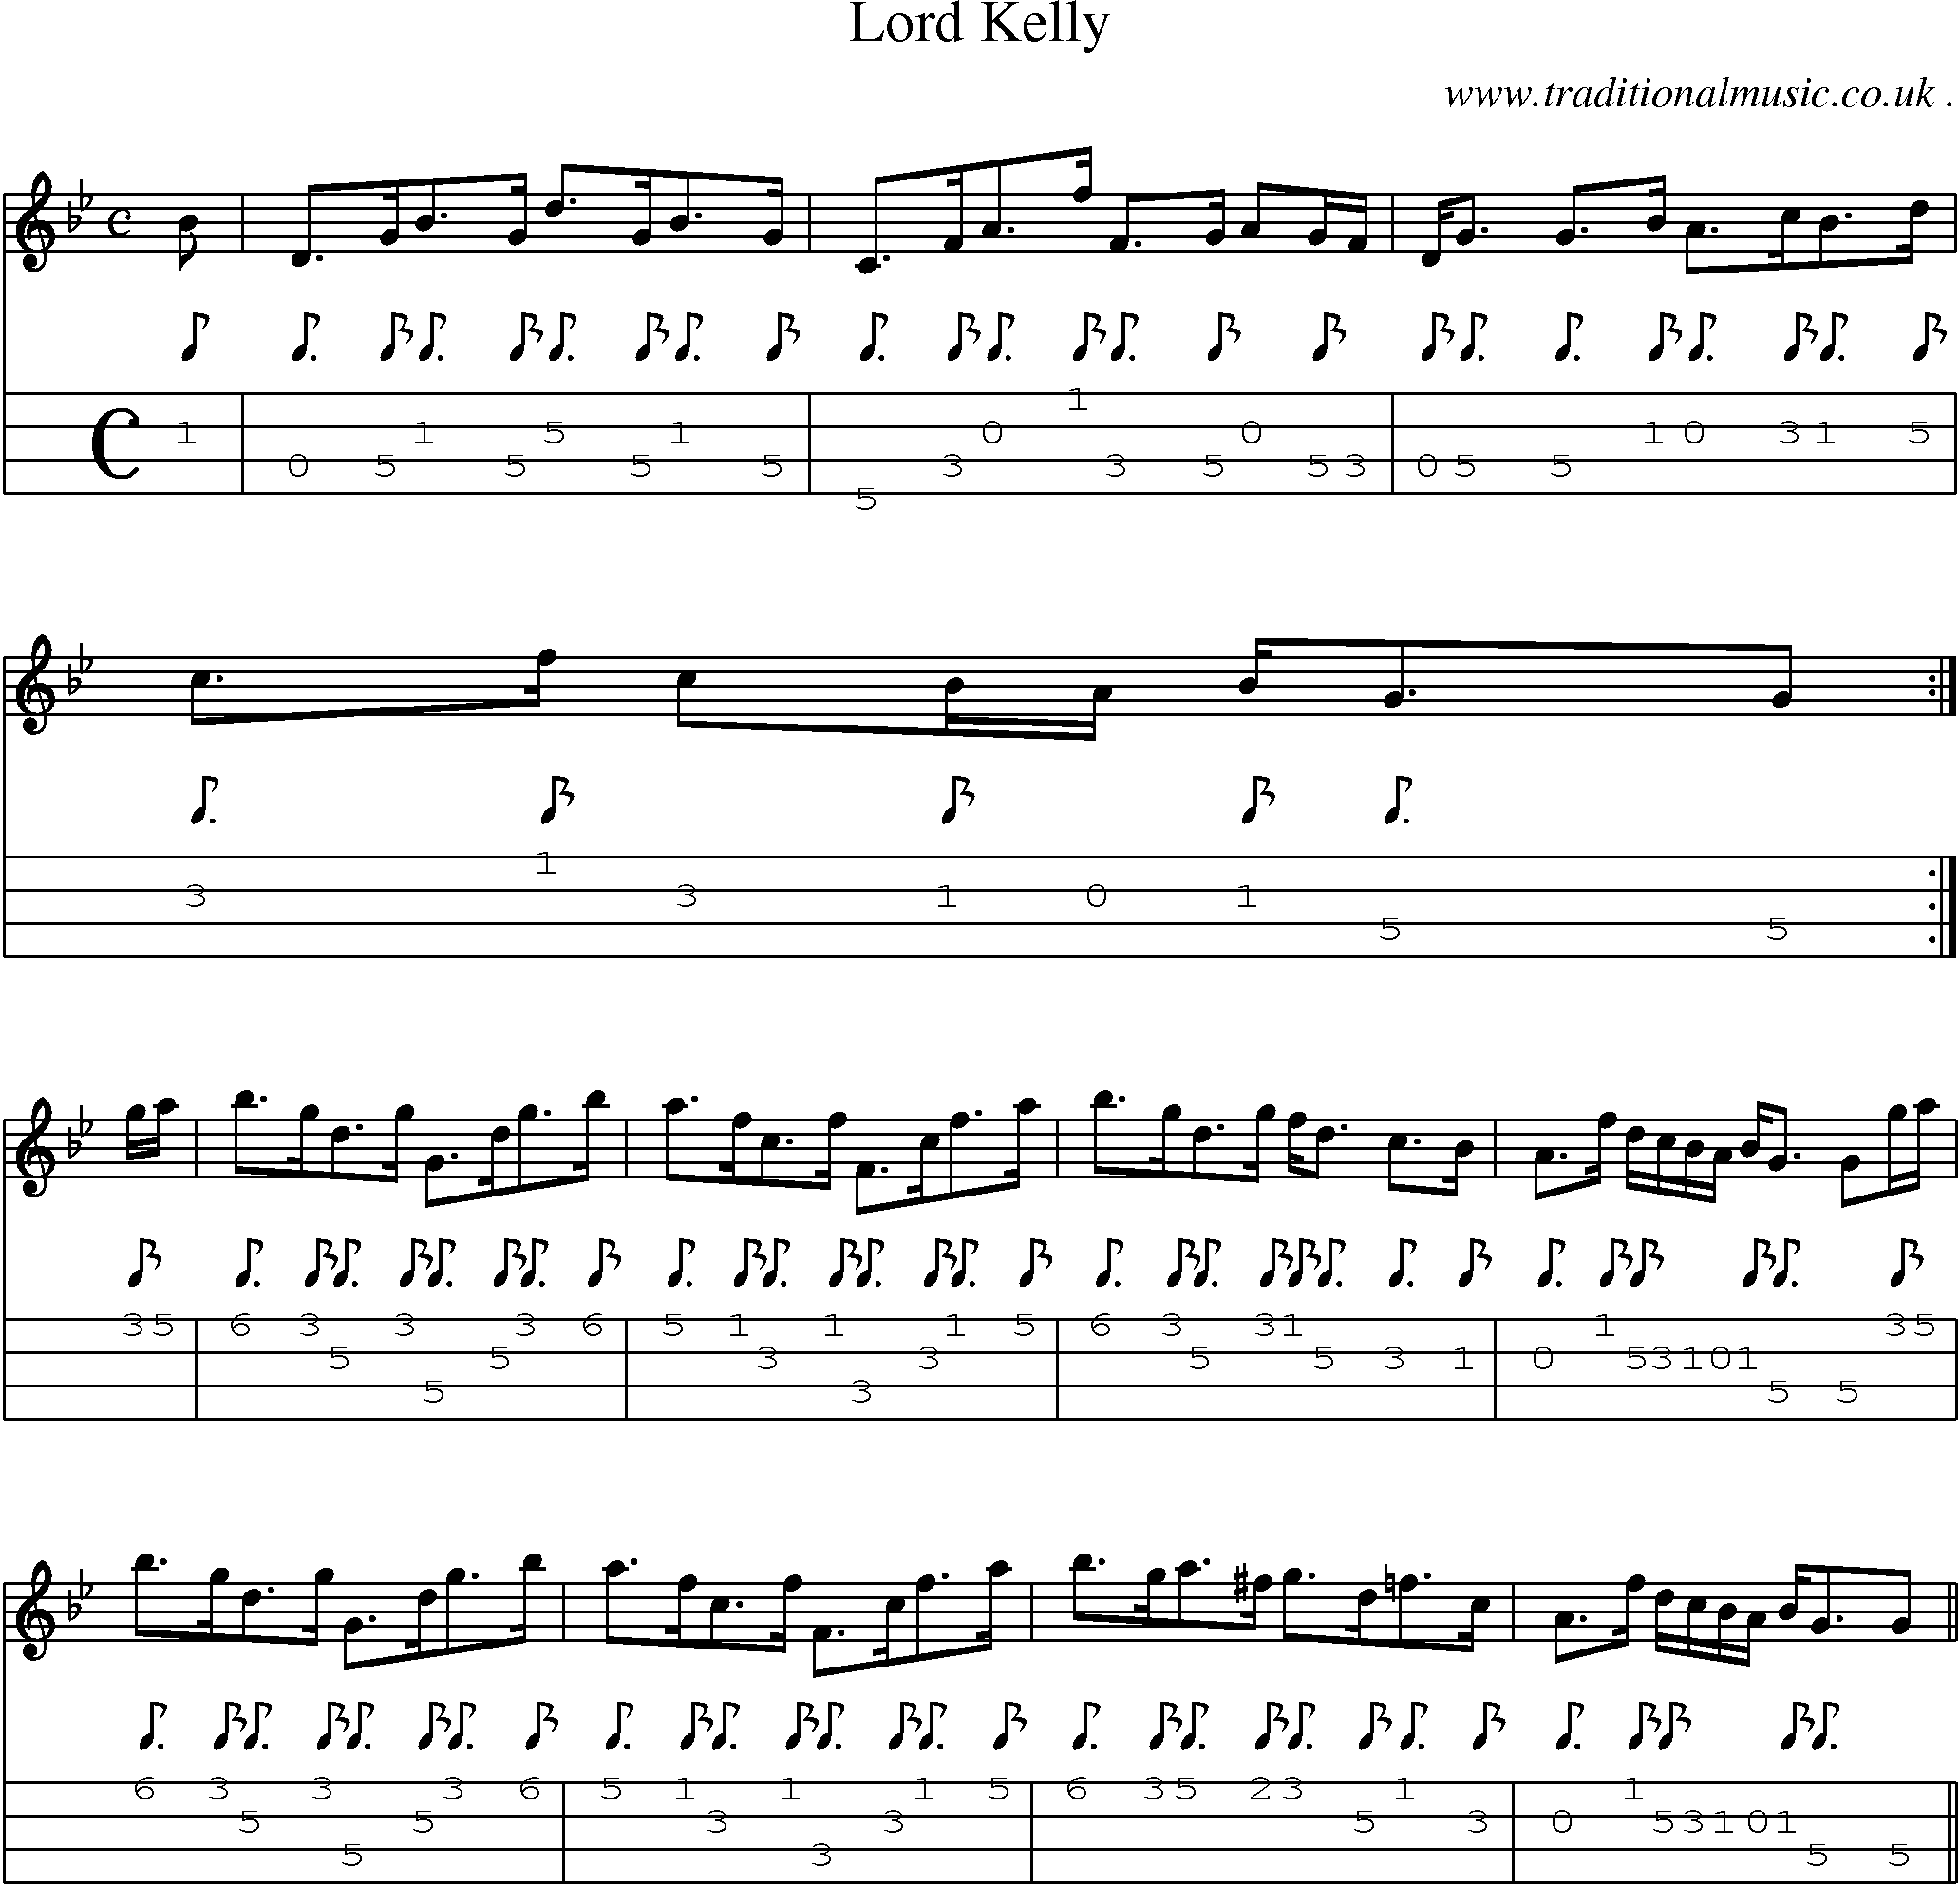 Sheet-music  score, Chords and Mandolin Tabs for Lord Kelly